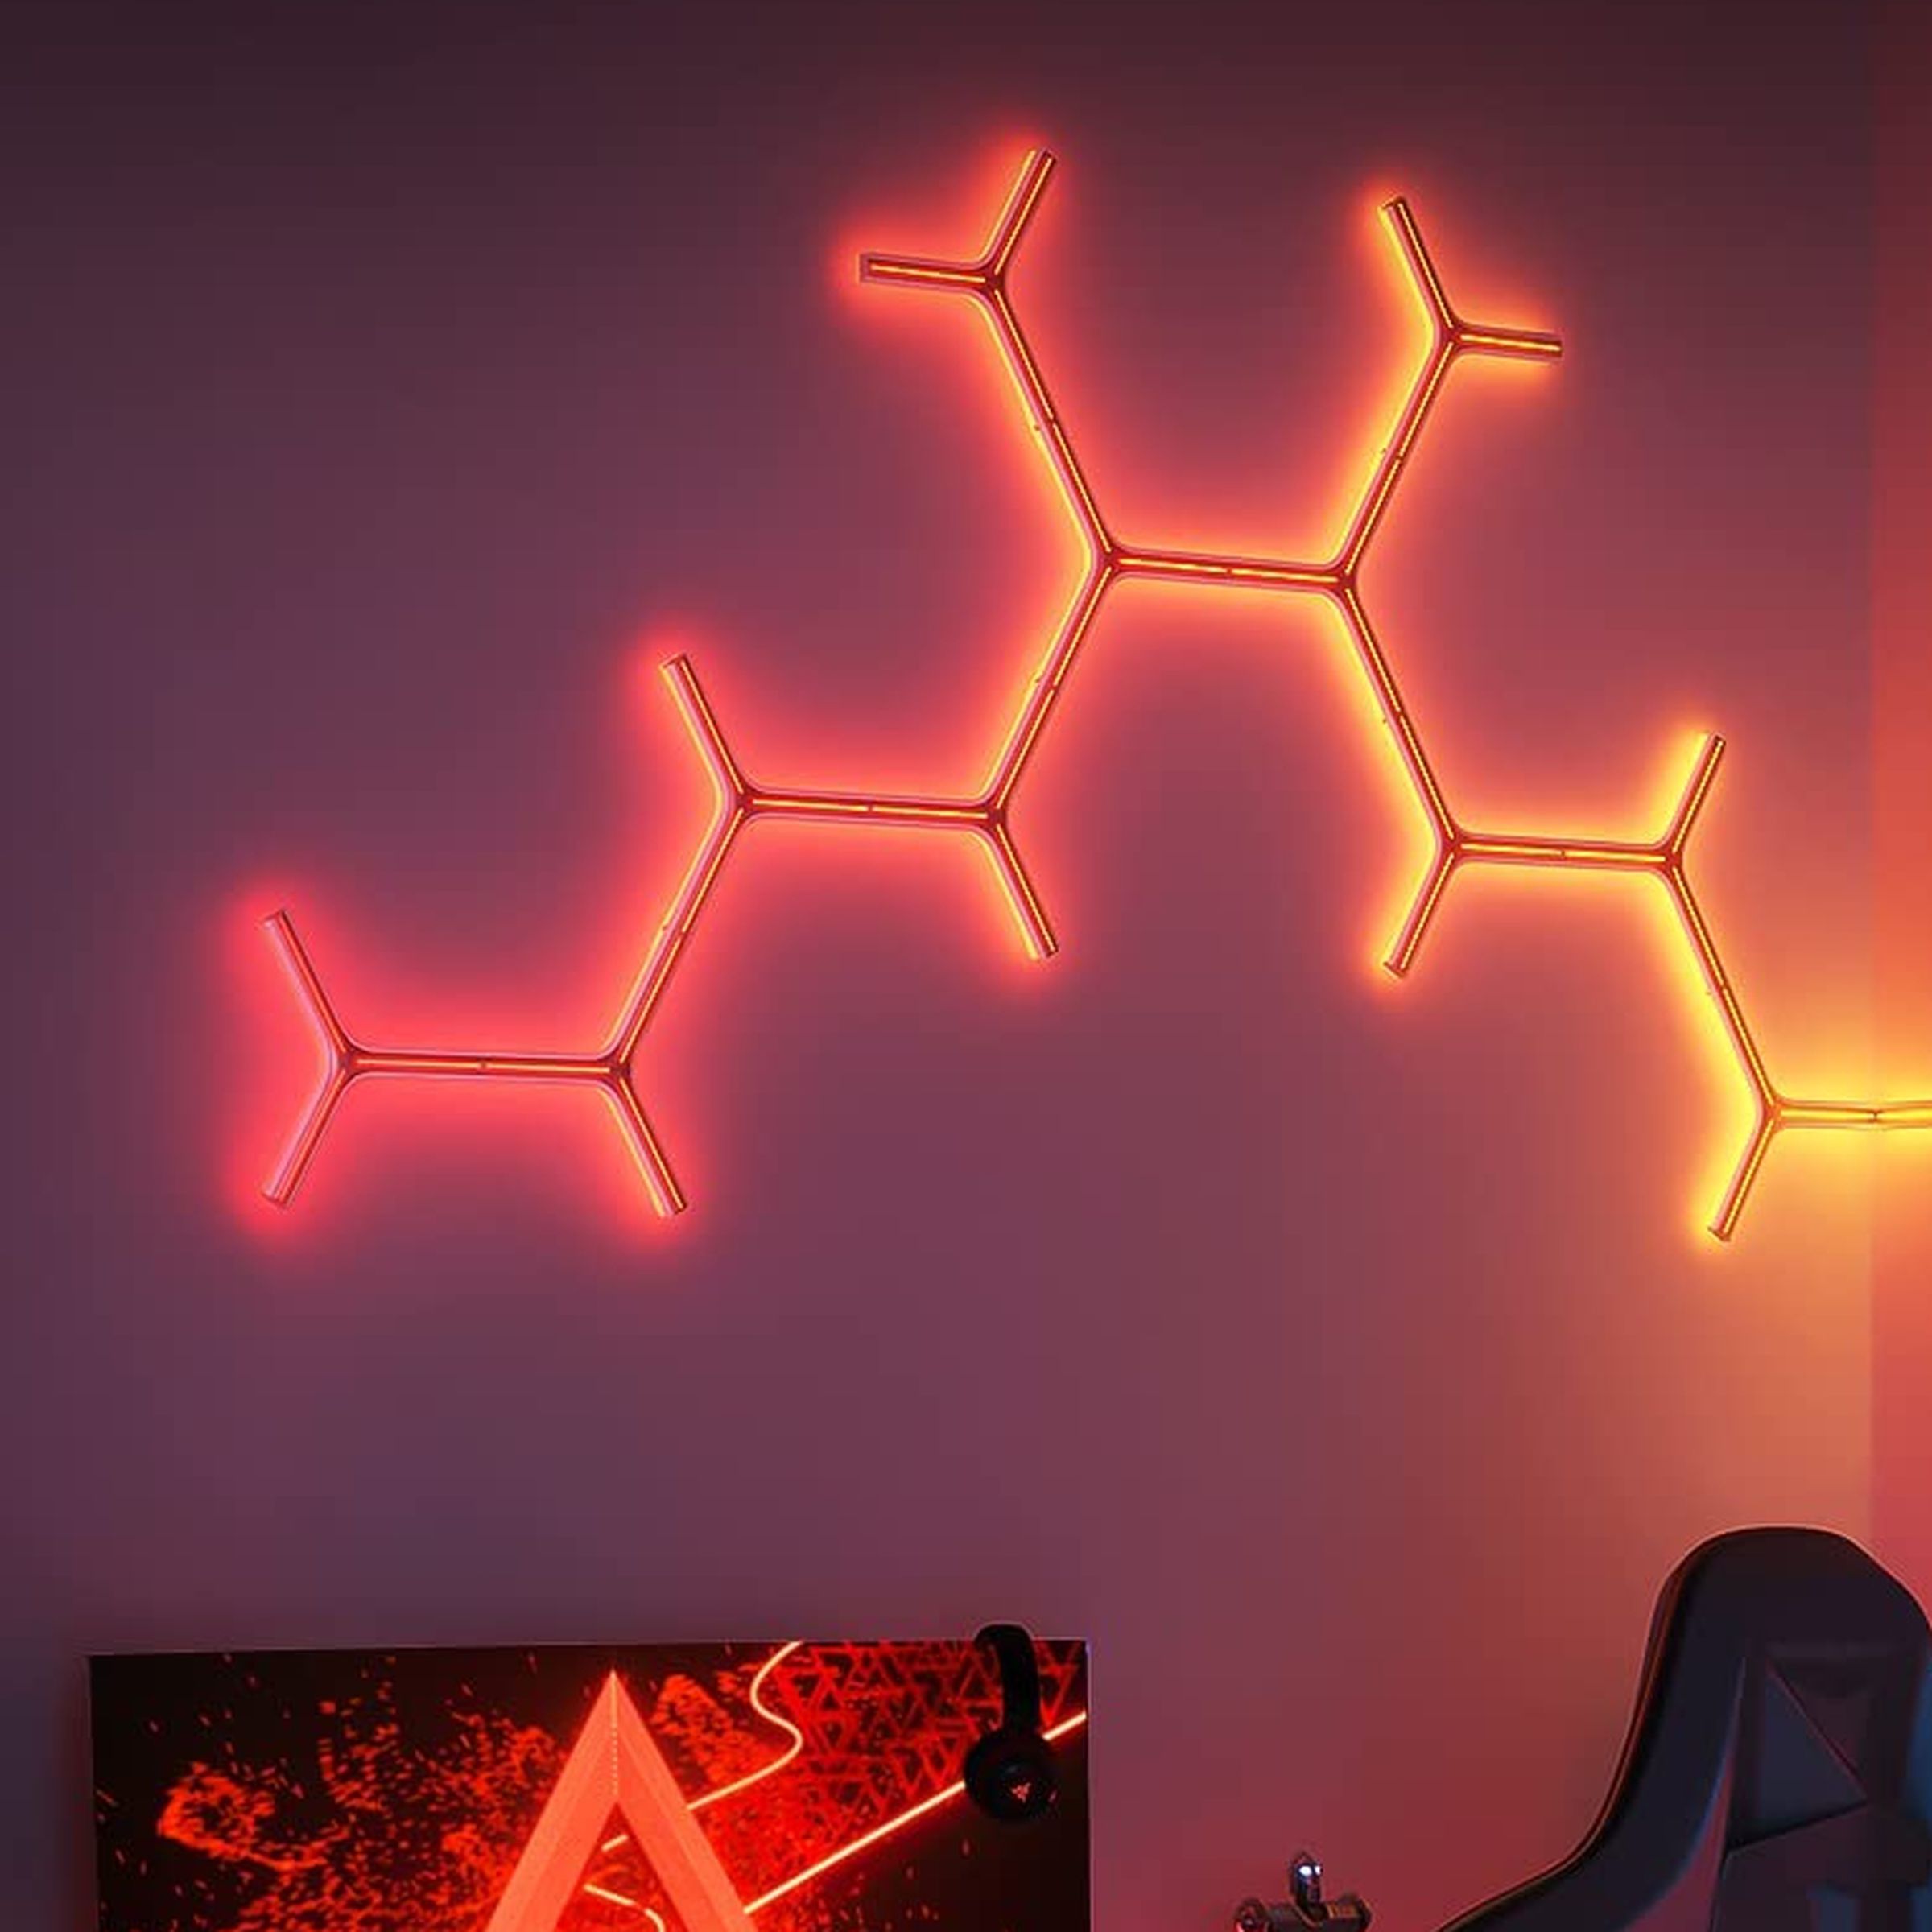 A selection of Govee’s Glide Y Lights illuminating the wall above a computer with a red glow.